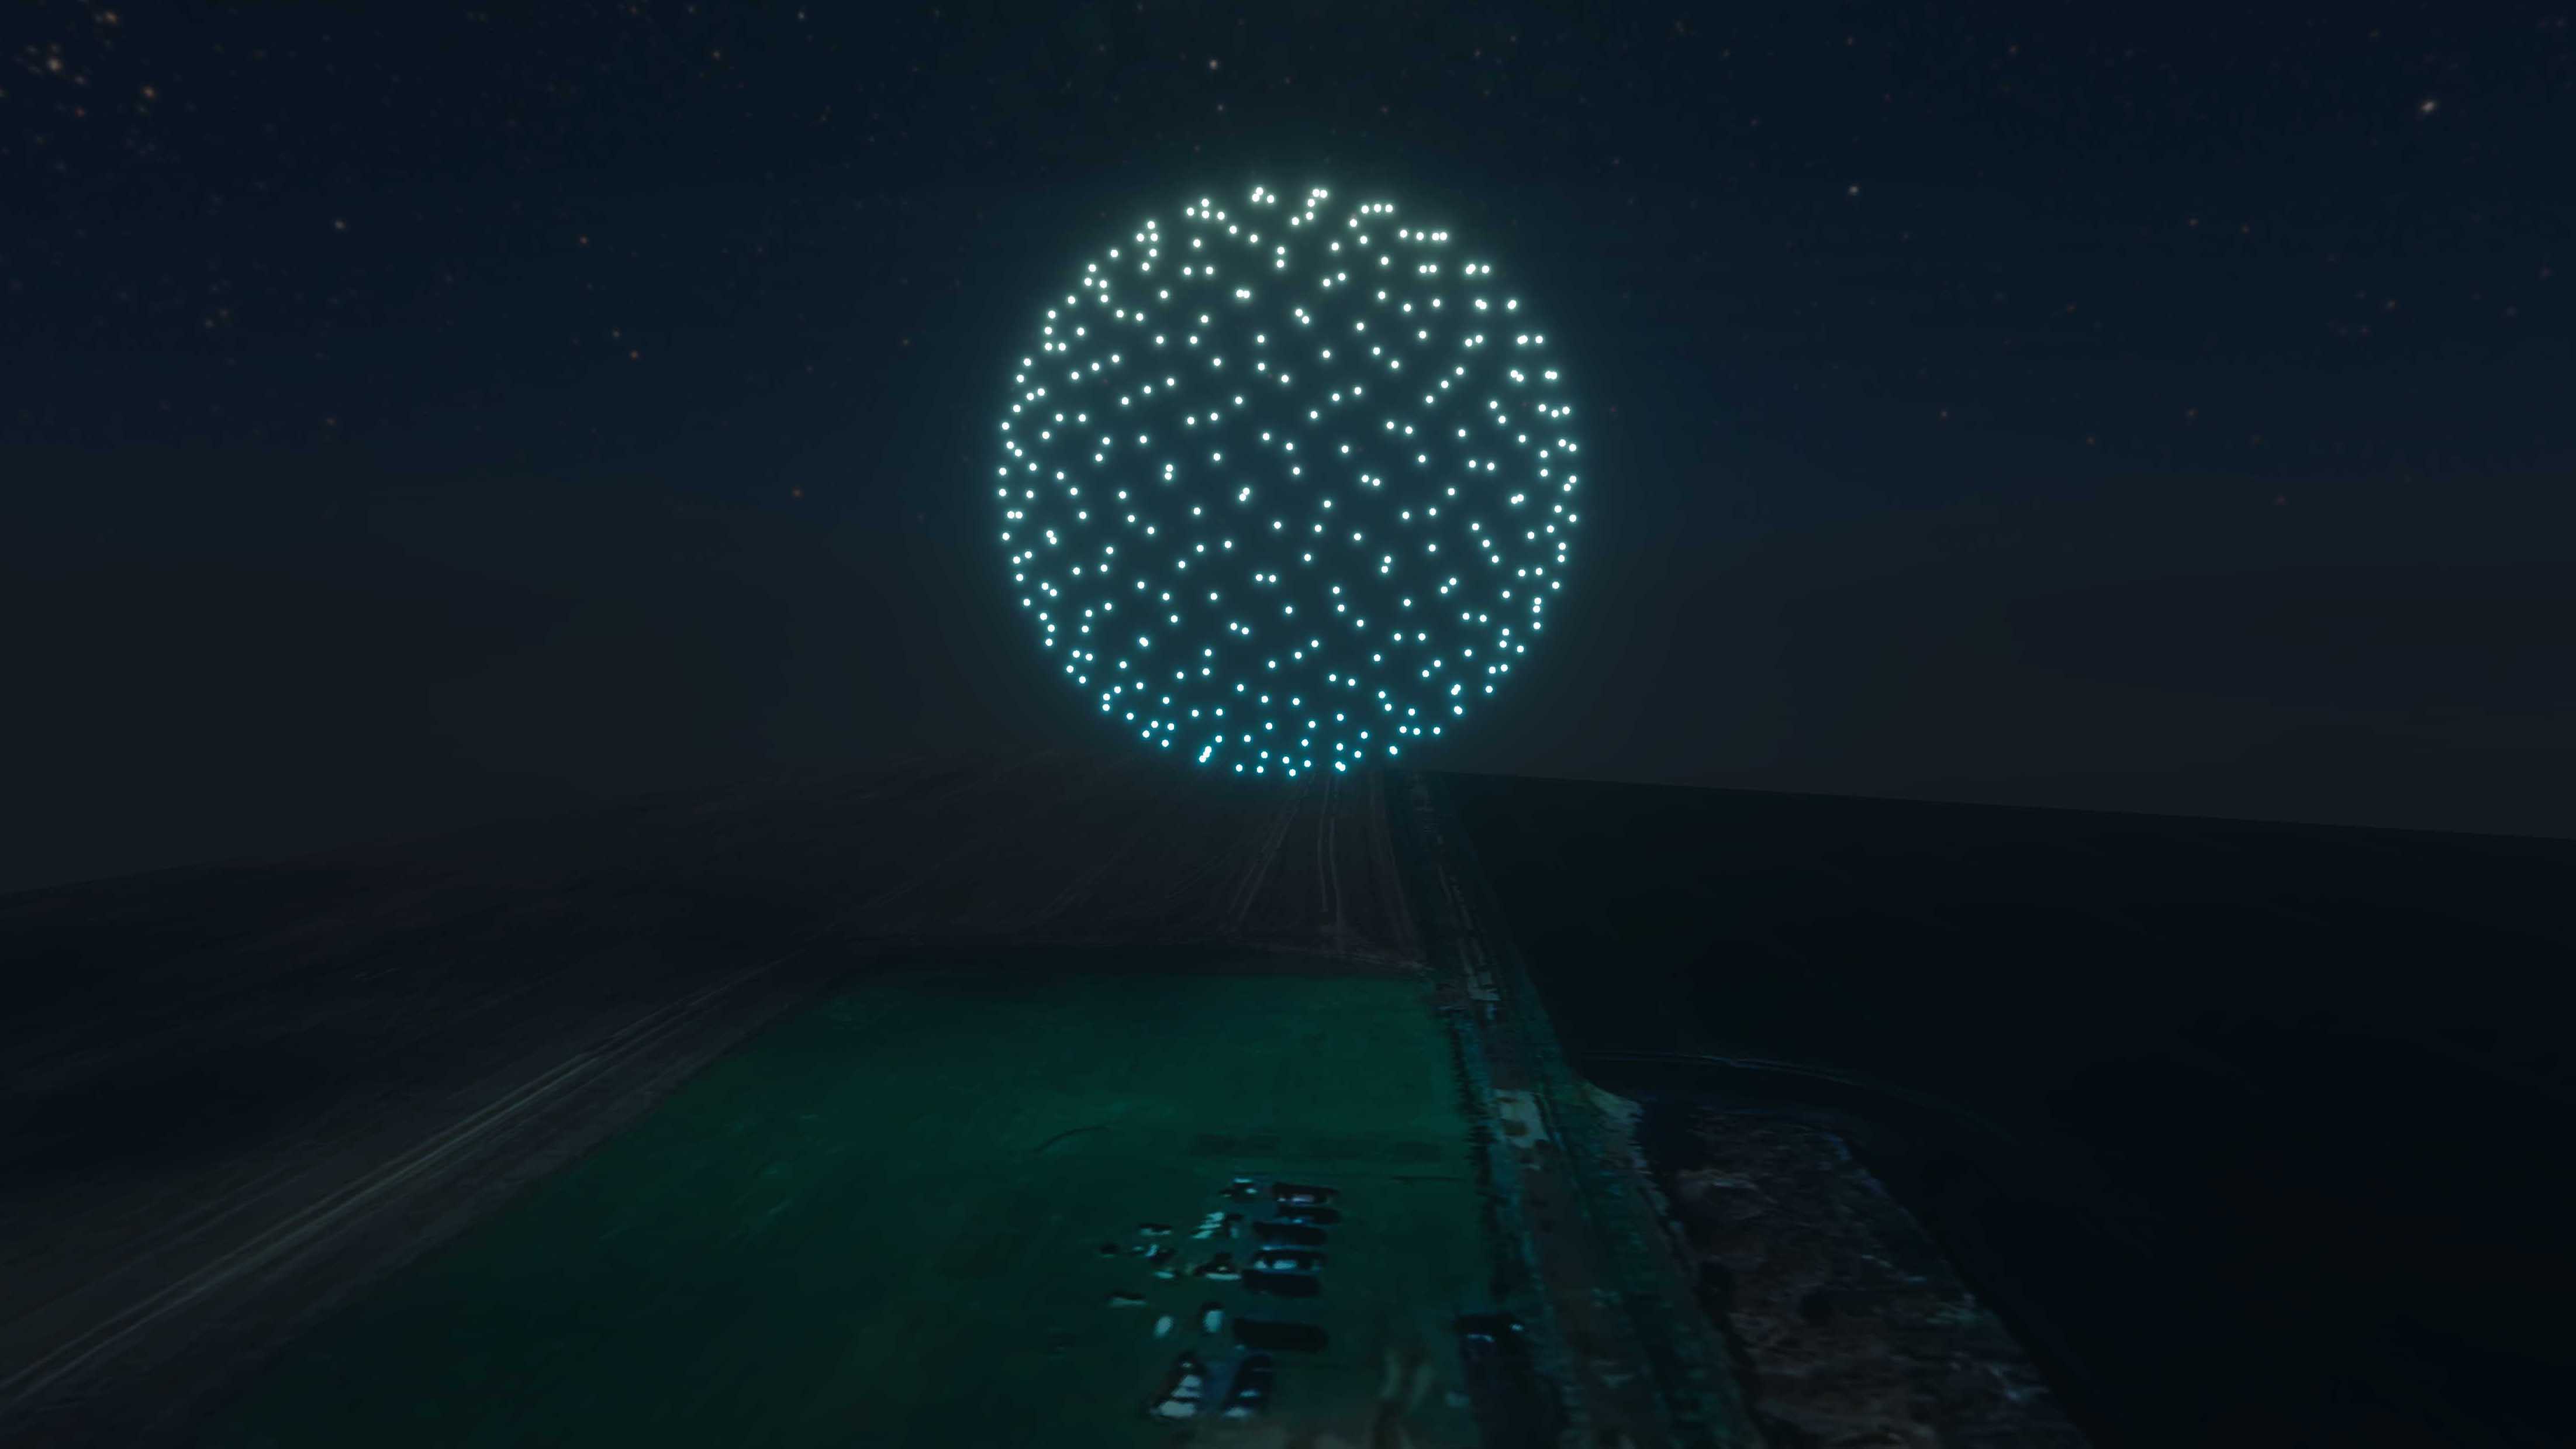 300 show drones forming a sphere